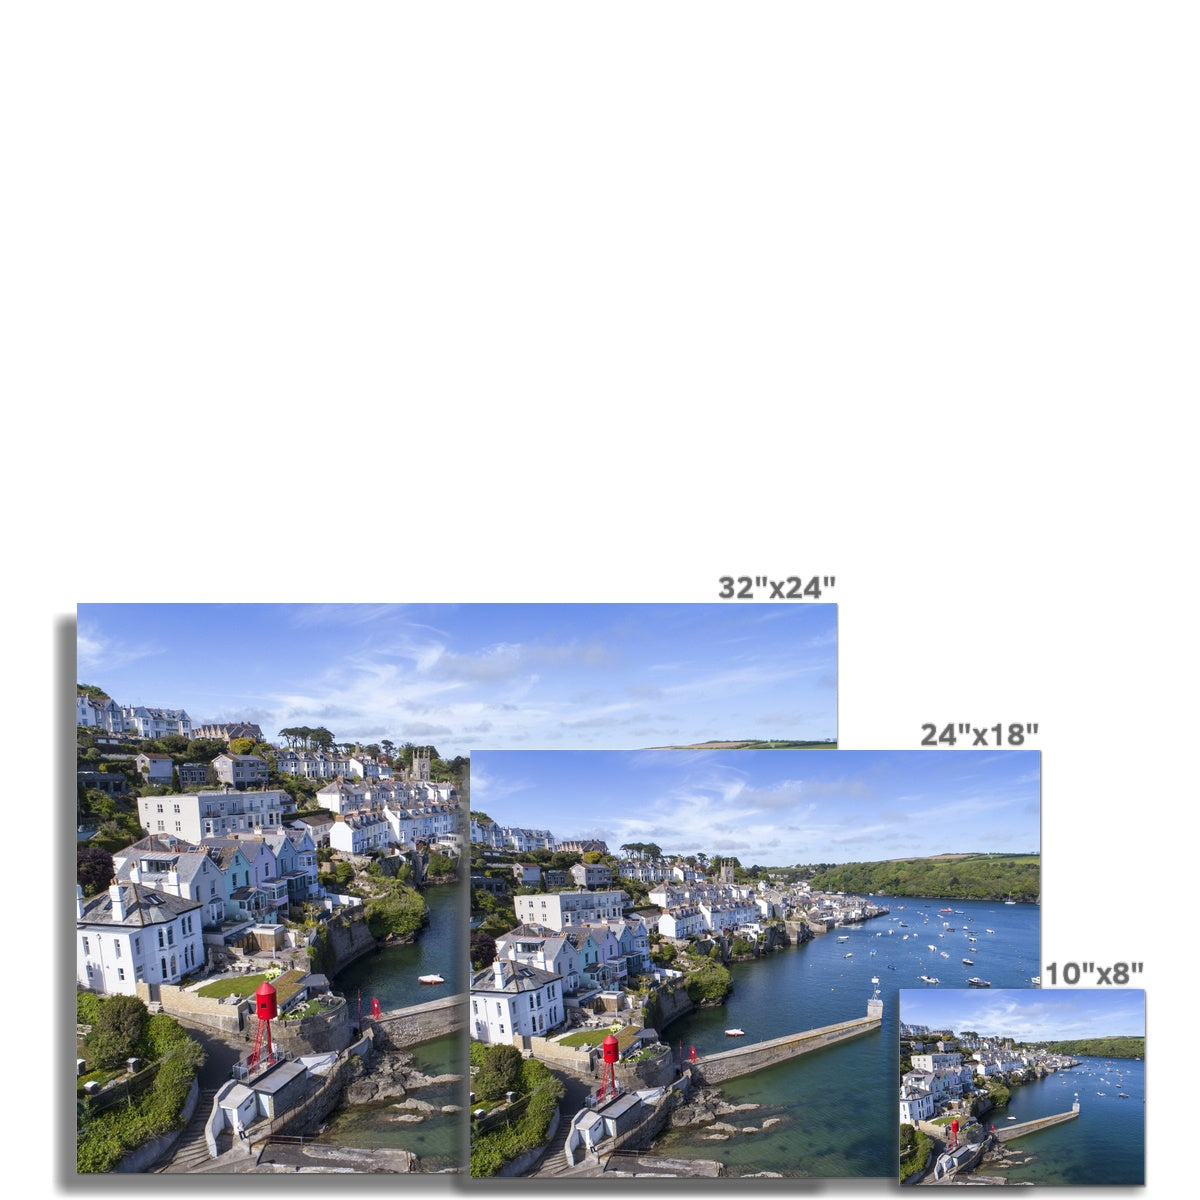 fowey picture sizes